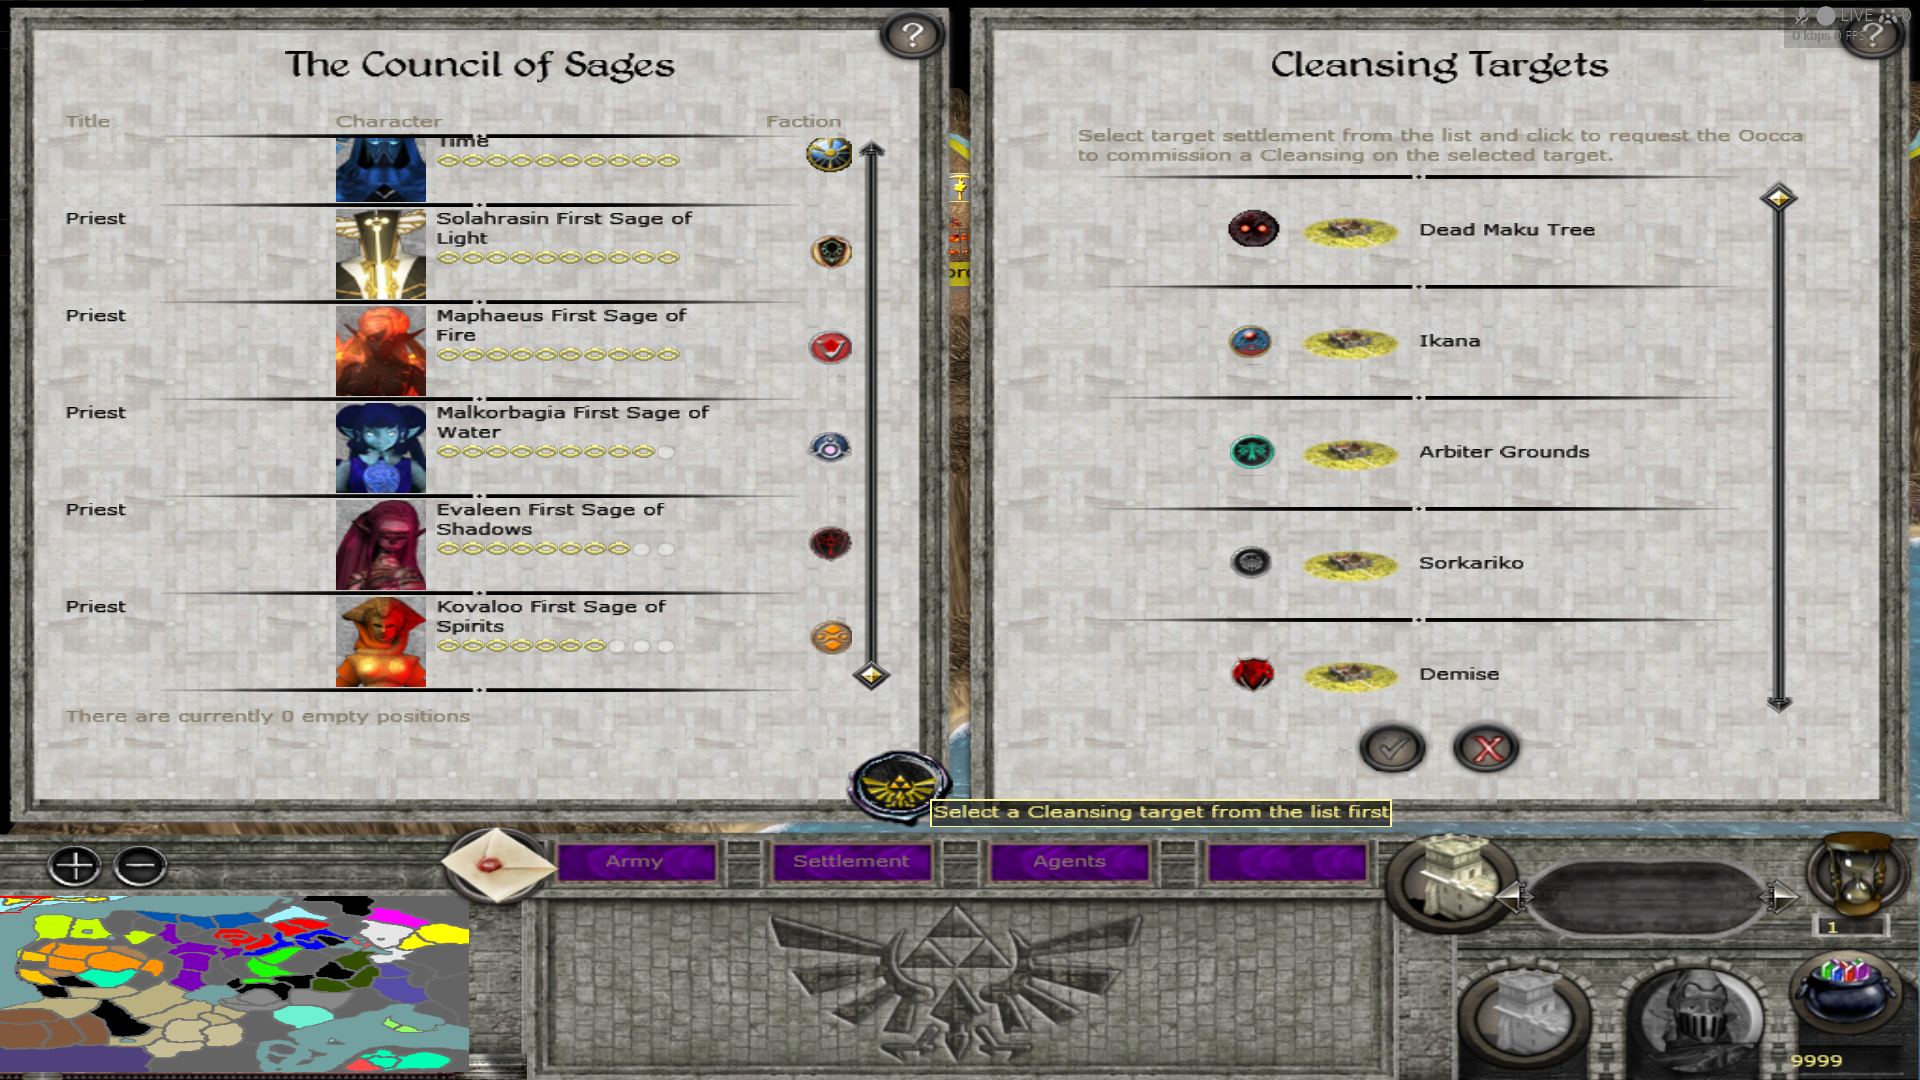 Crusading/Cleansing targets specifically chosen!